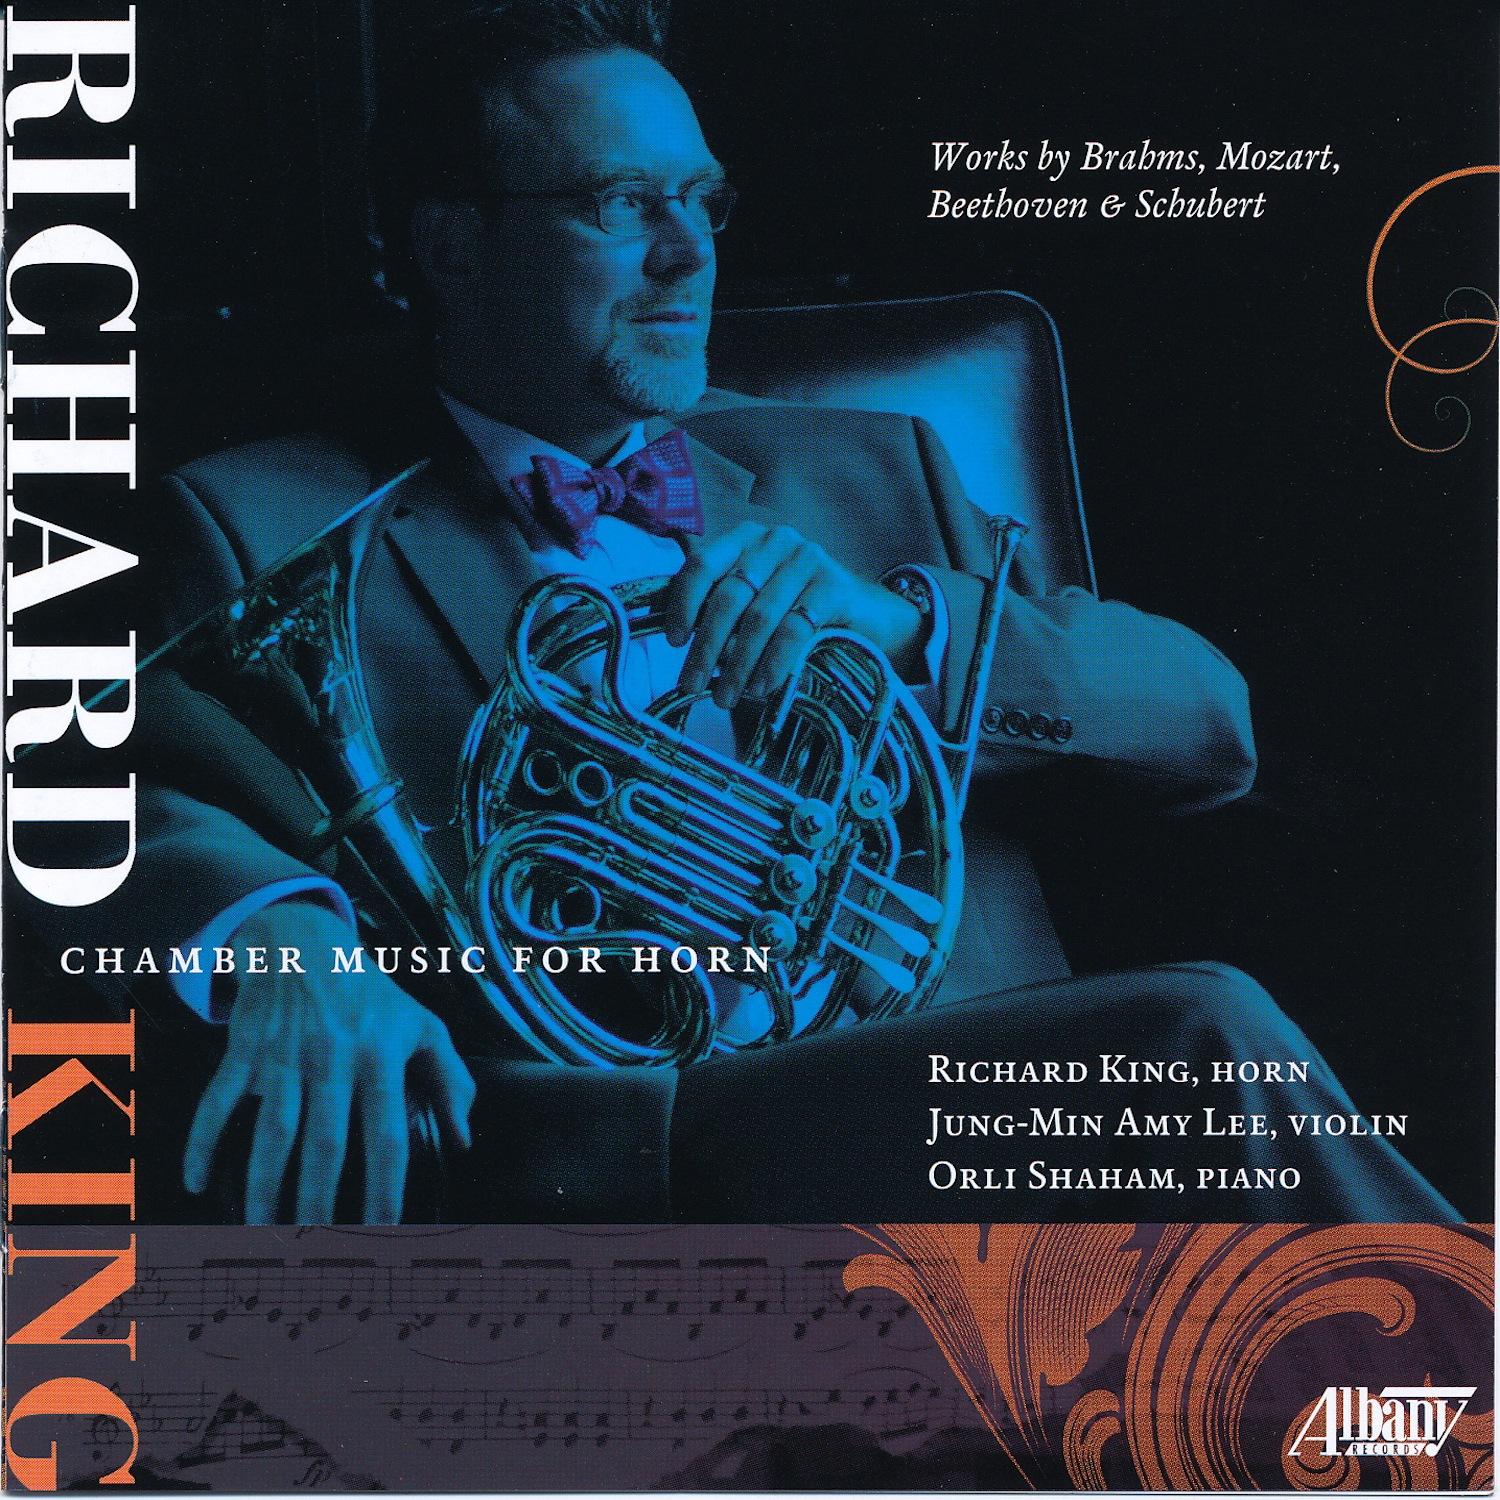 Chamber Music for Horn (Featuring Richard King)